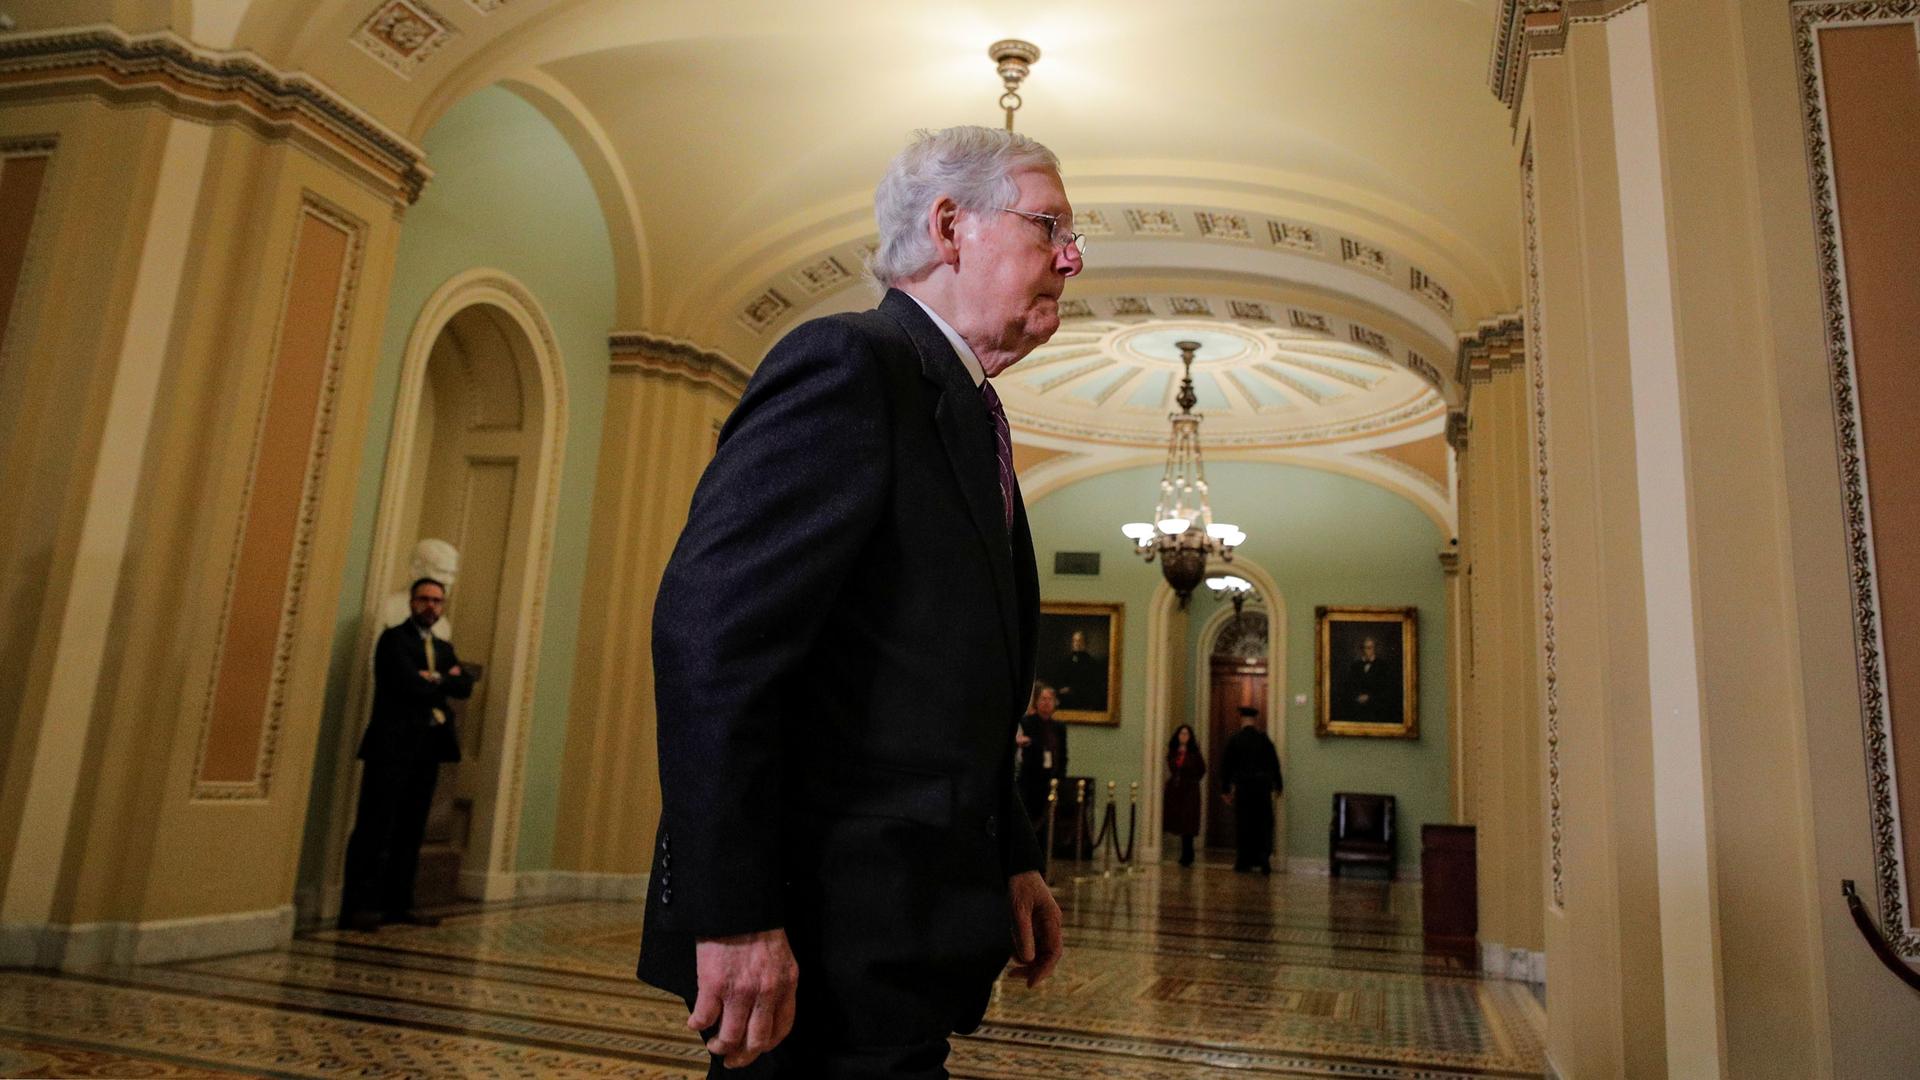 Senate Majority Leader Mitch McConnell is shown walking in the hallways of the Capitol building and wearing a dark suit.